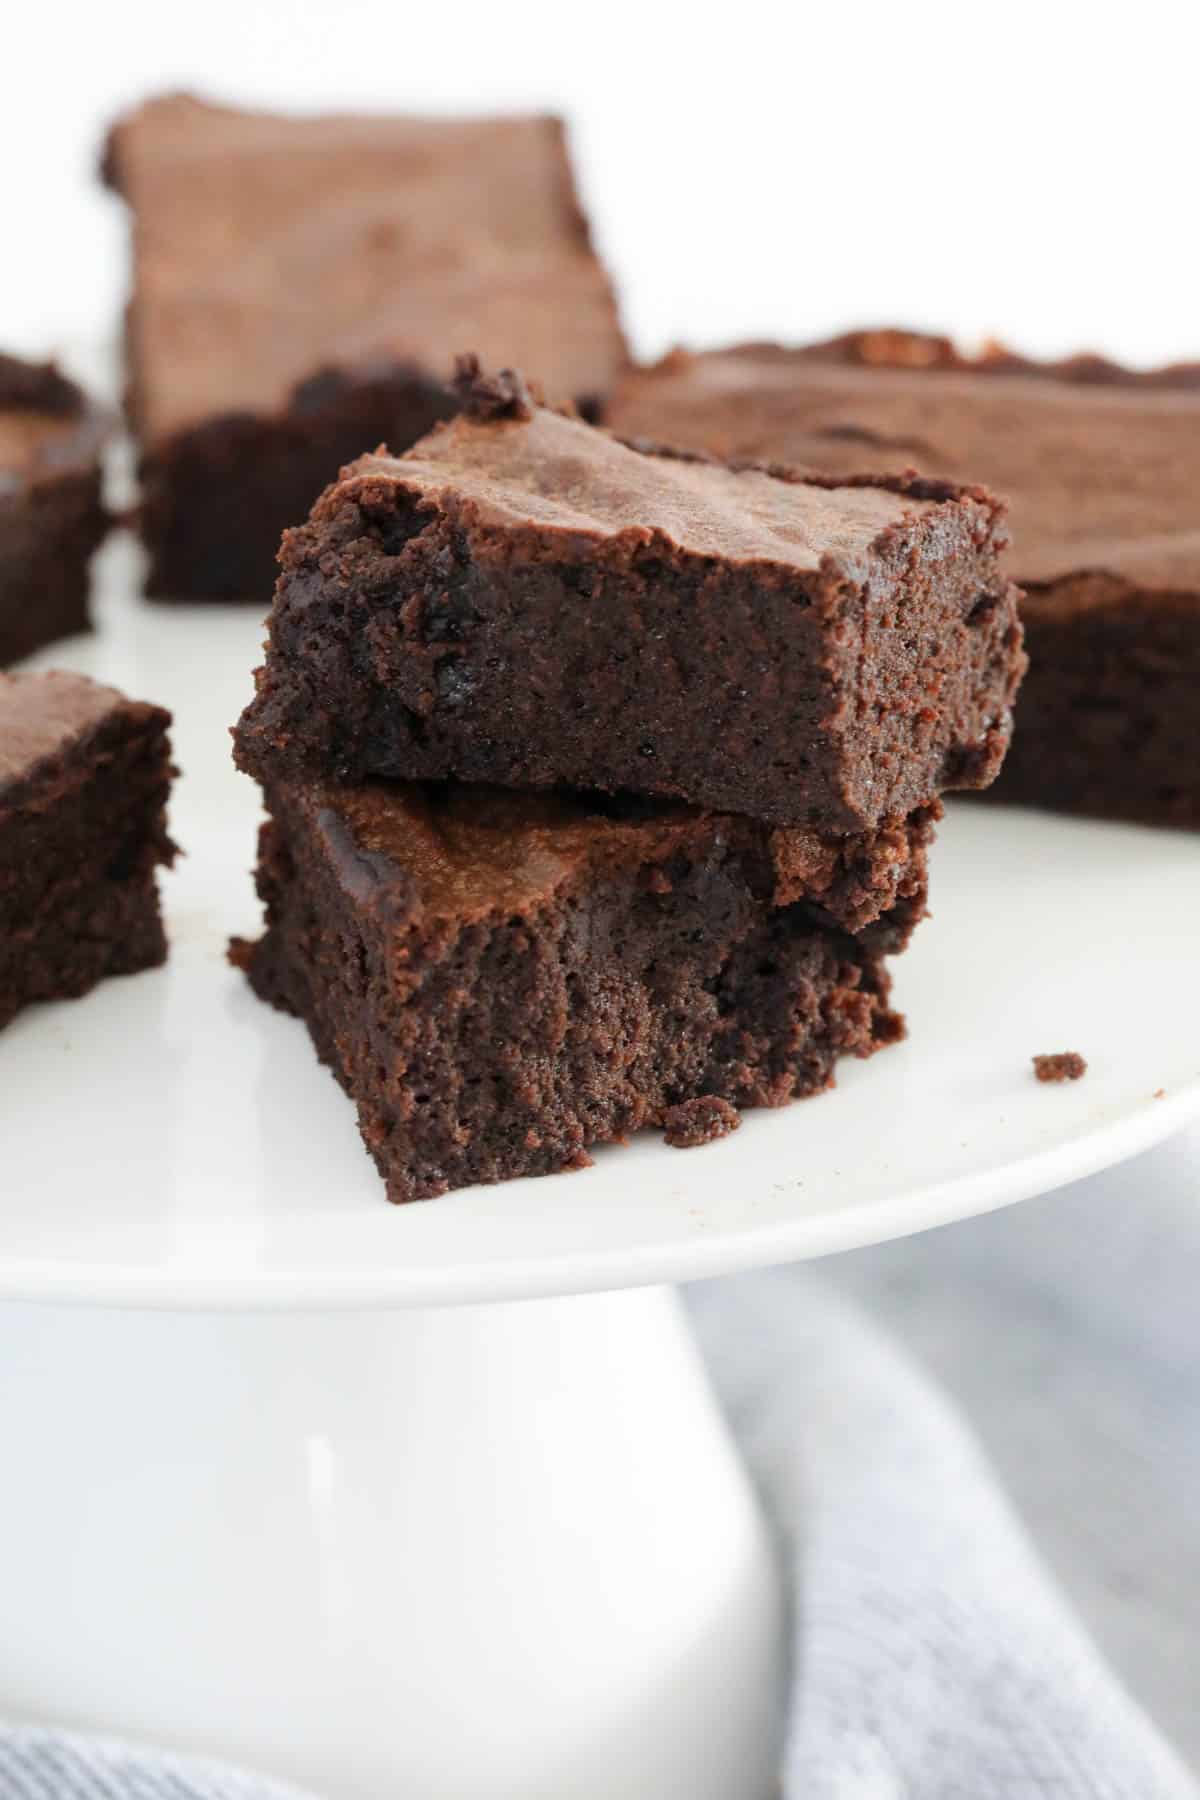 Chunky rich brownies on a white plate.